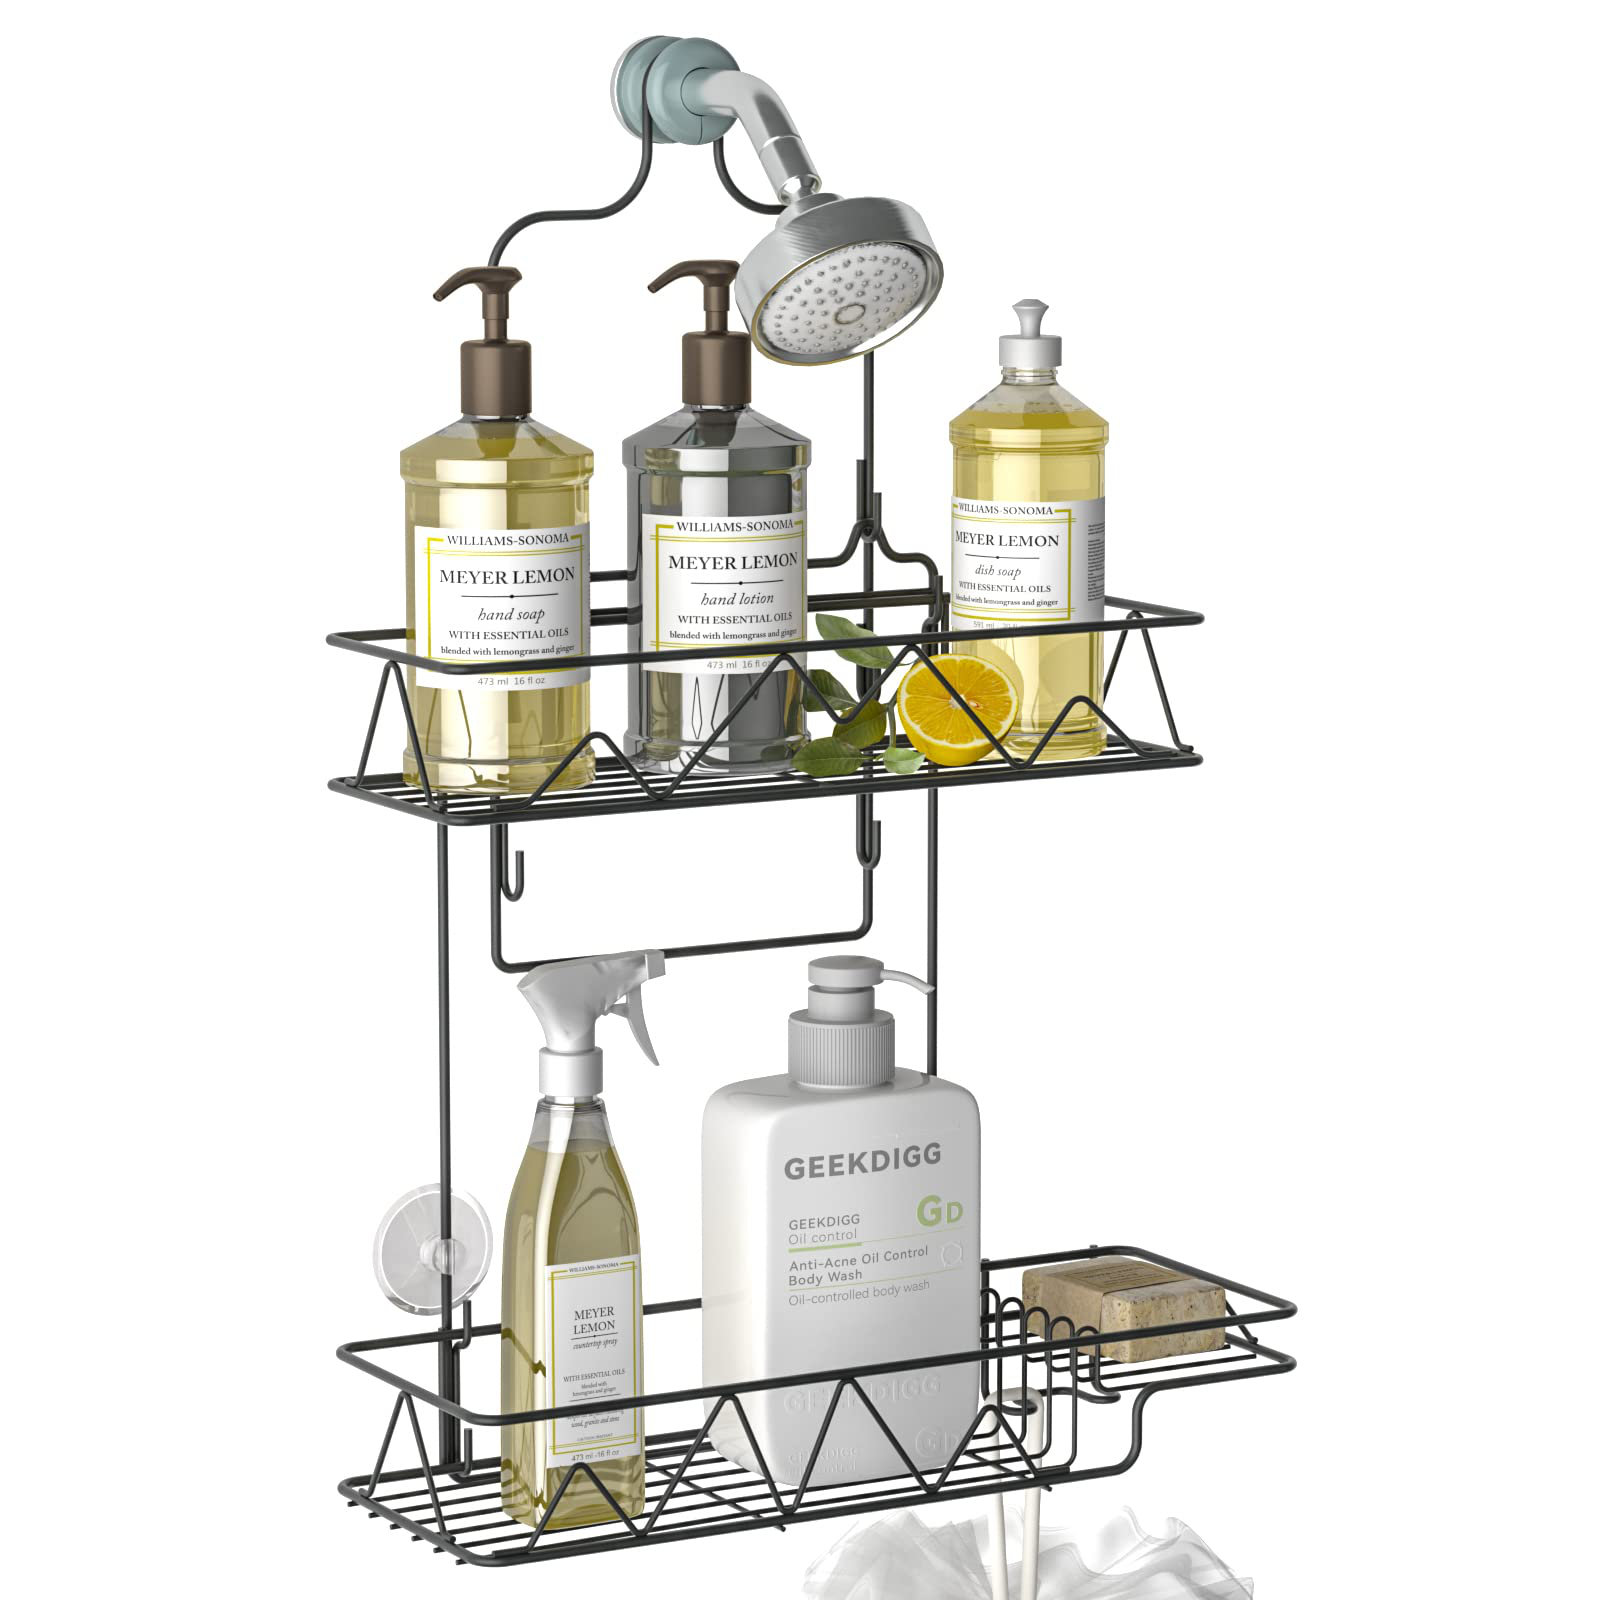 Rebrilliant Lorayna Hanging Stainless Steel Shower Caddy & Reviews